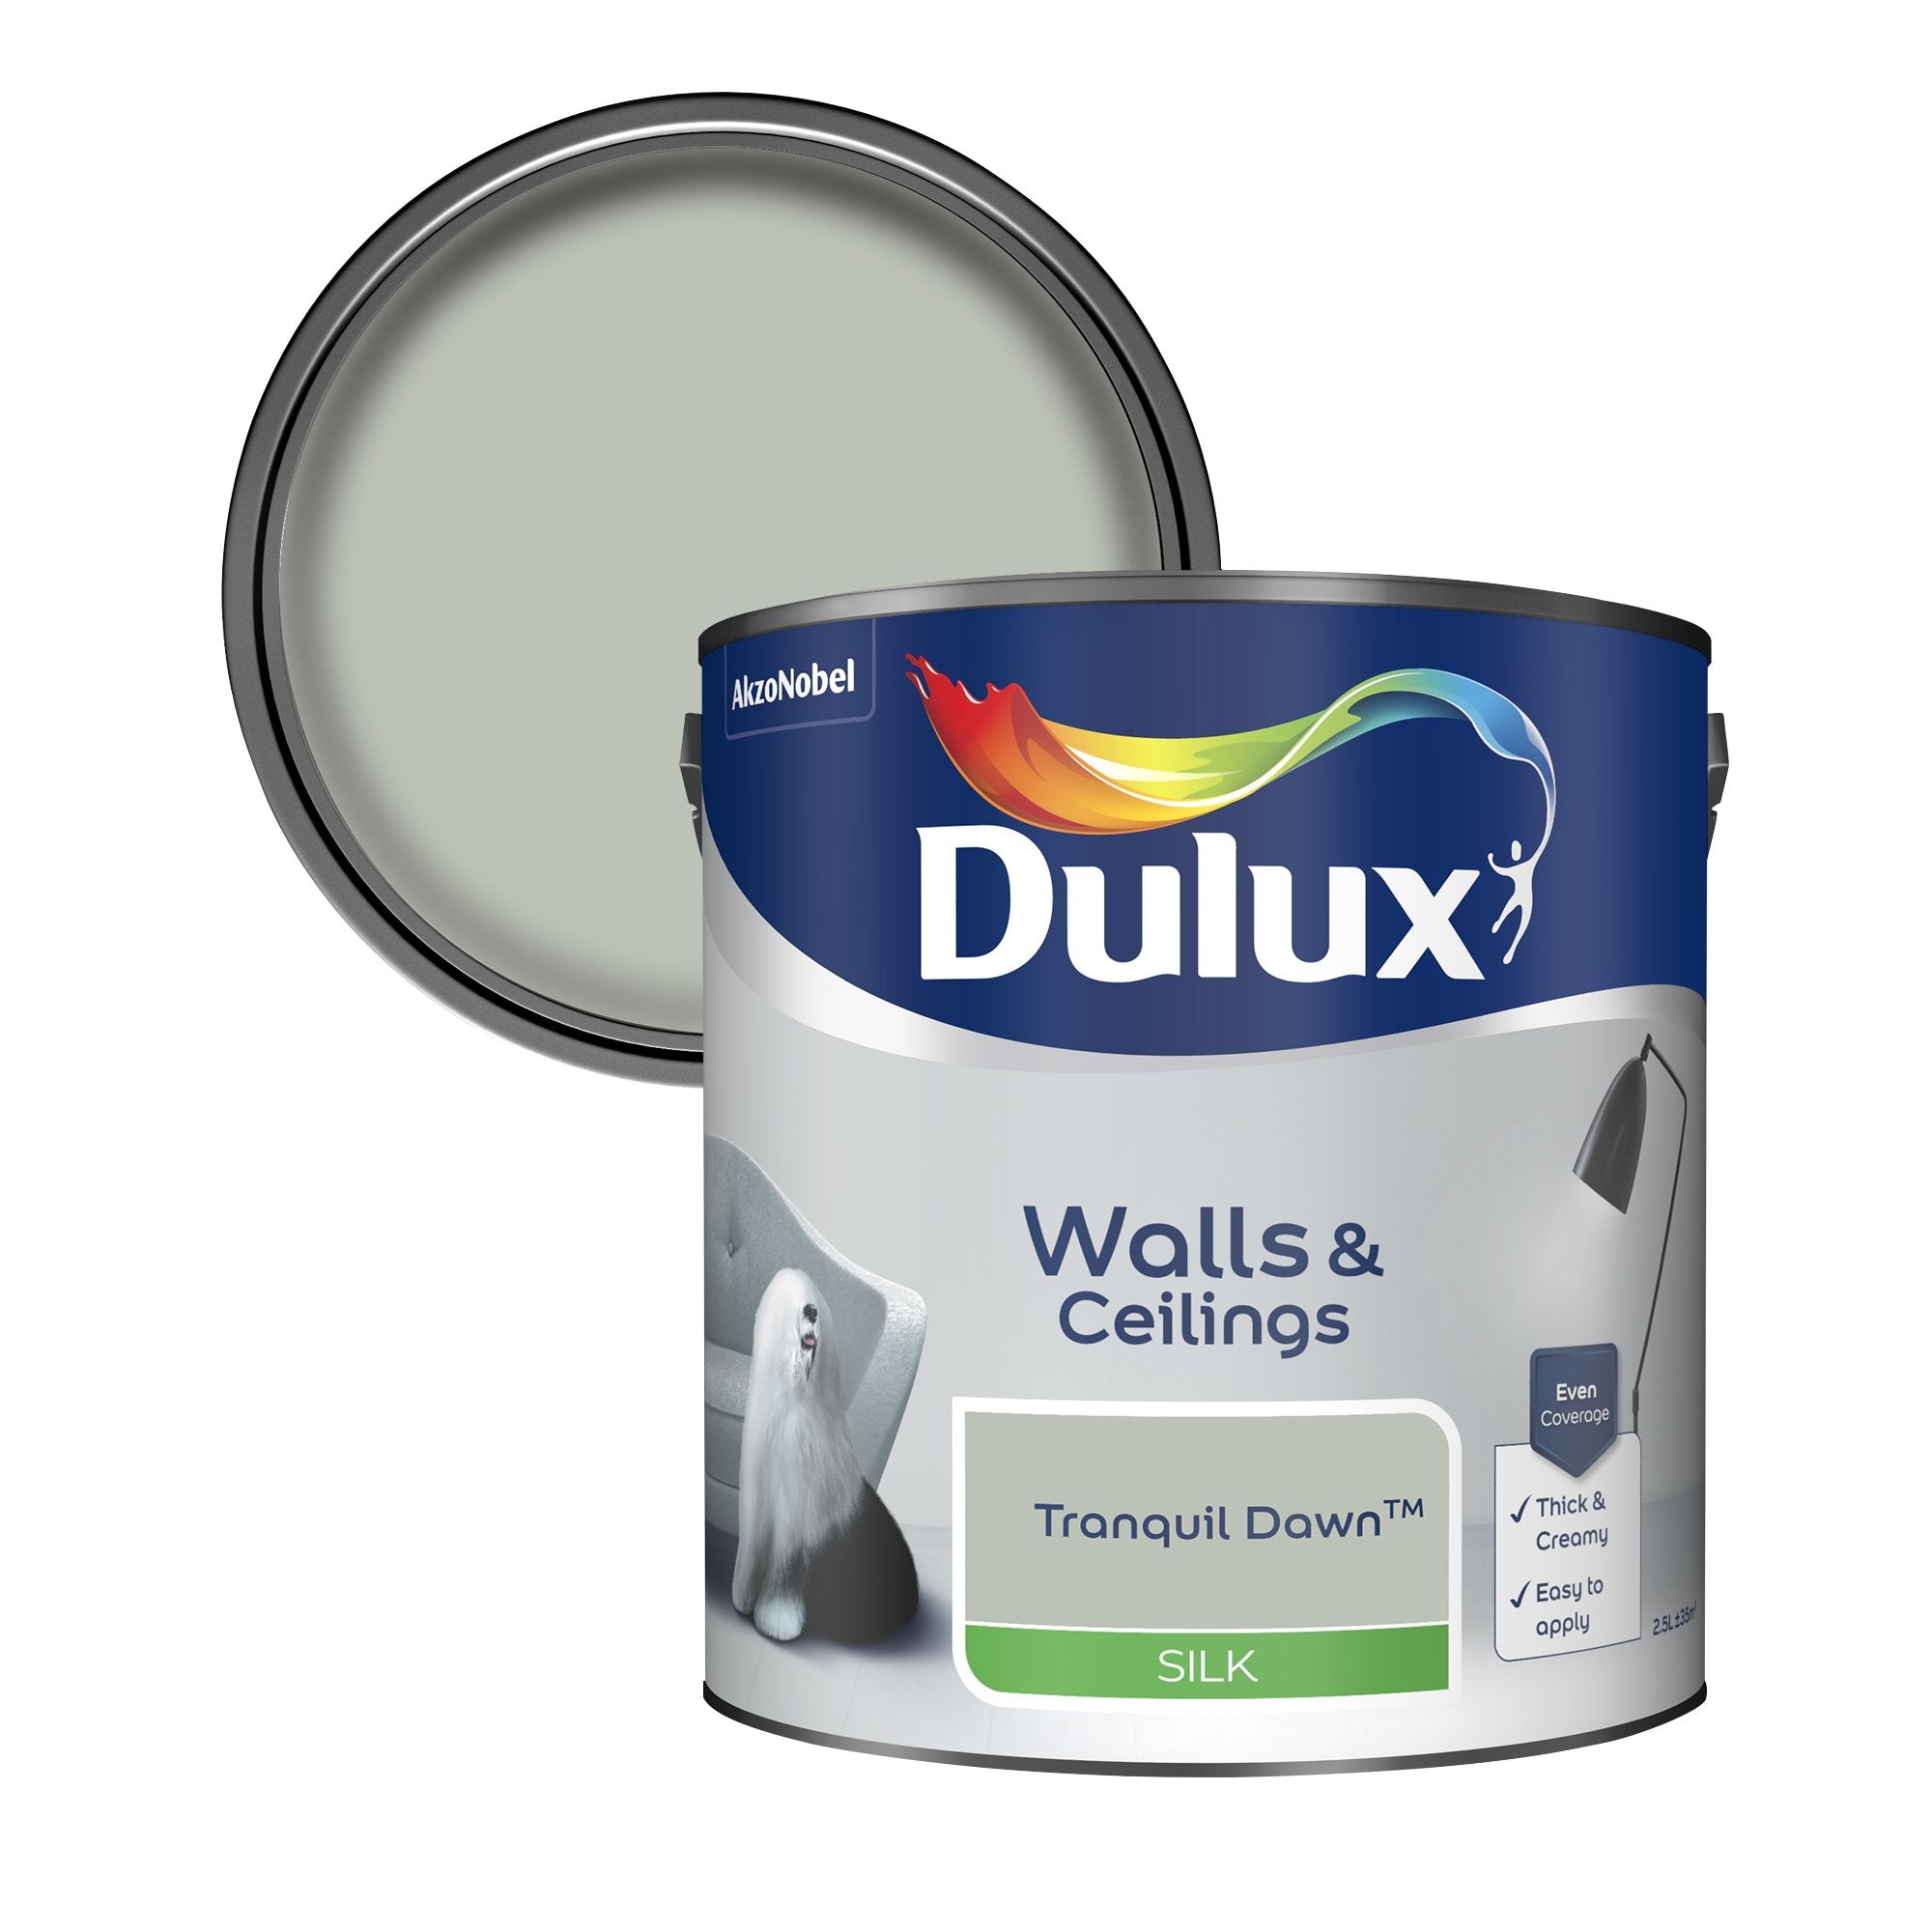 Dulux-Silk-Emulsion-Paint-For-Walls-And-Ceilings-Tranquil-Dawn-2.5L